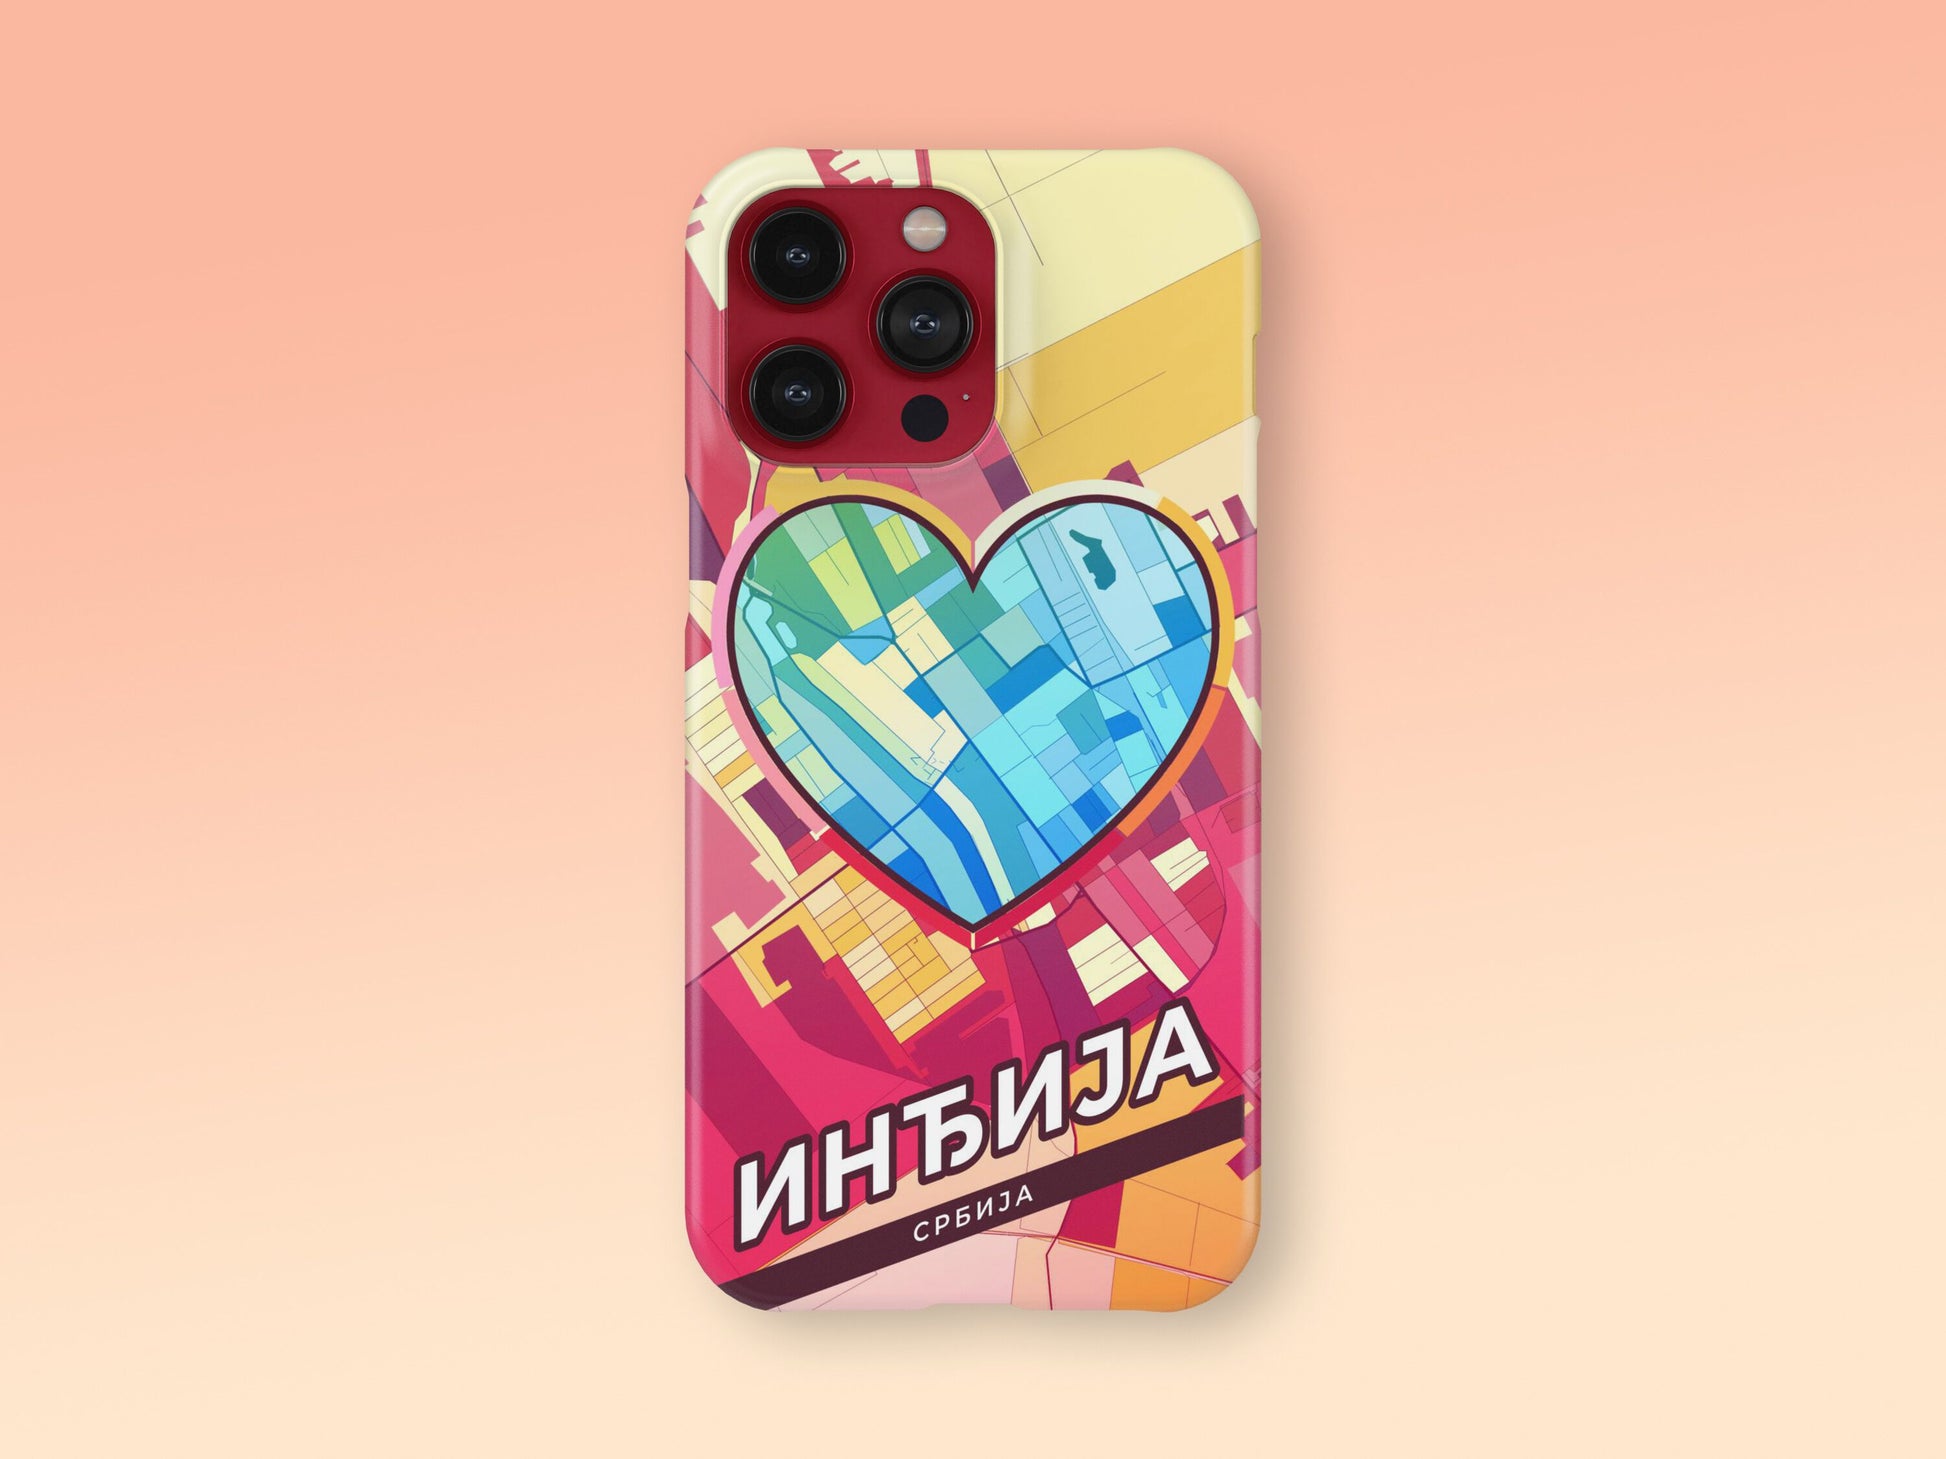 Inđija Serbia slim phone case with colorful icon. Birthday, wedding or housewarming gift. Couple match cases. 2